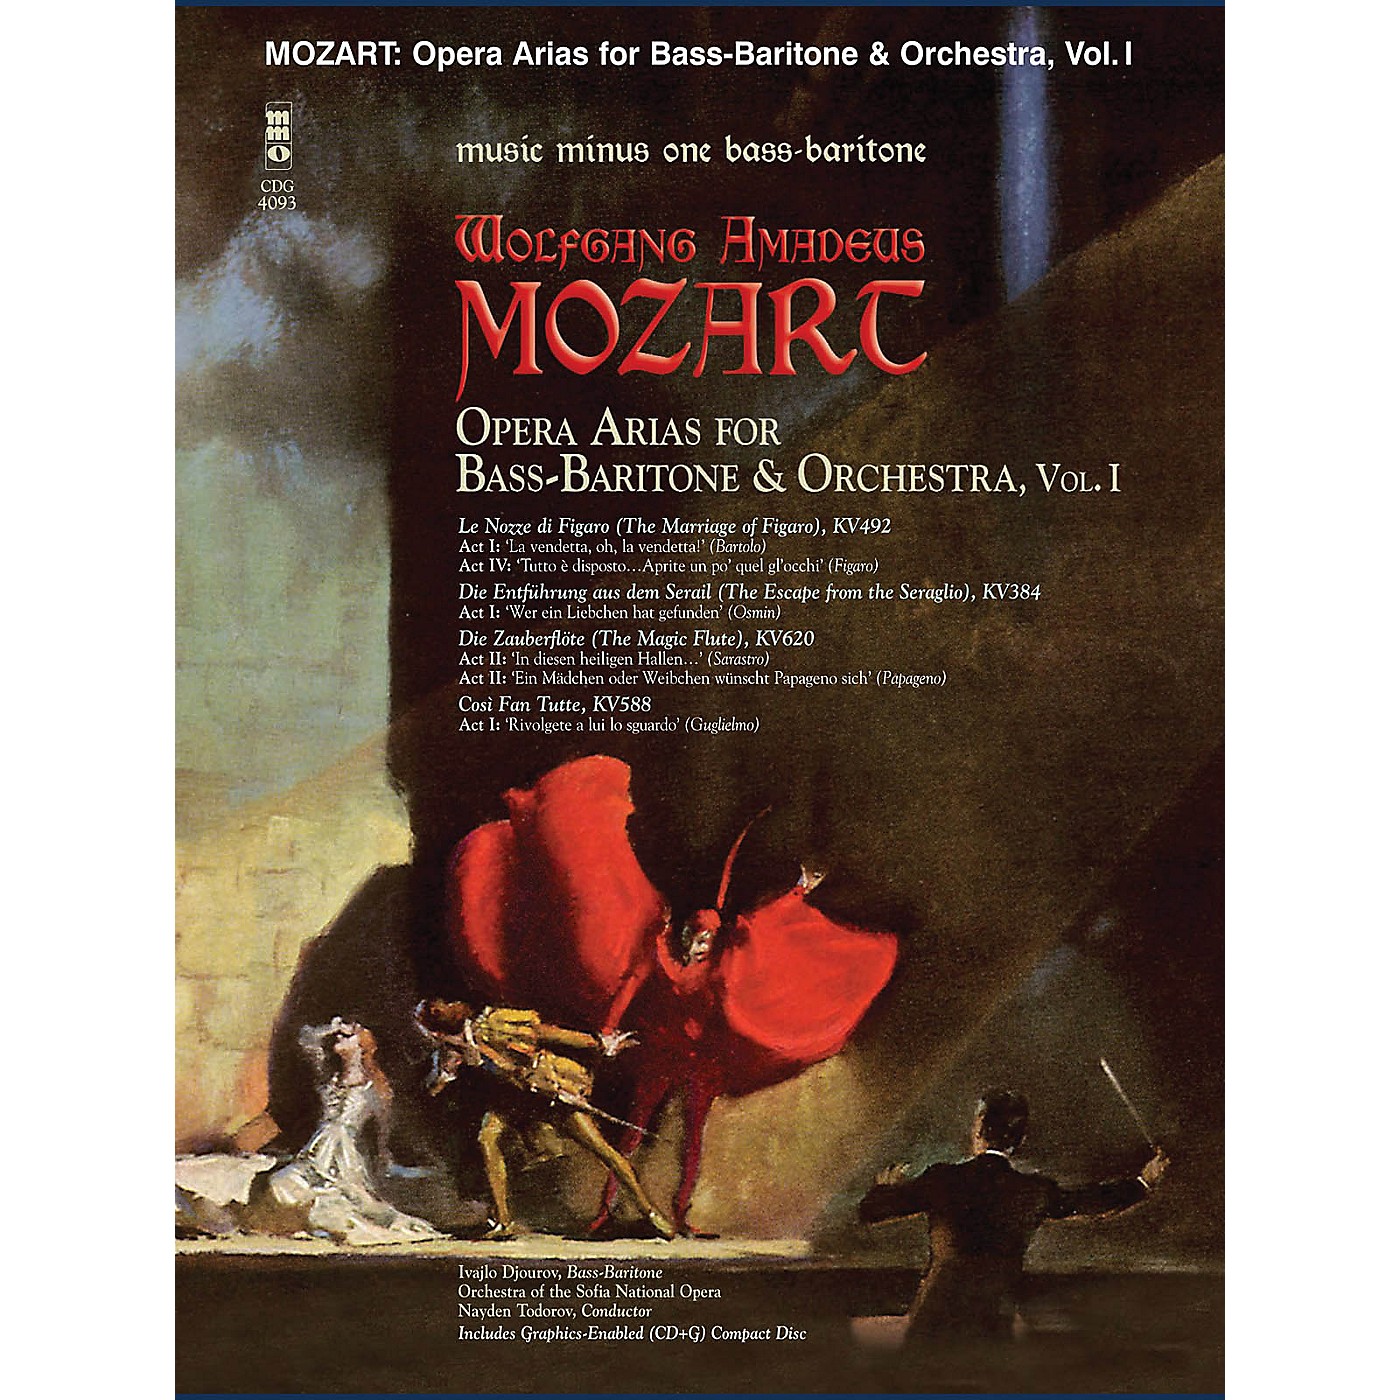 Music Minus One Mozart Opera Arias for Bass Baritone and Orchestra - Vol. I Music Minus One Softcover with CD by Mozart thumbnail